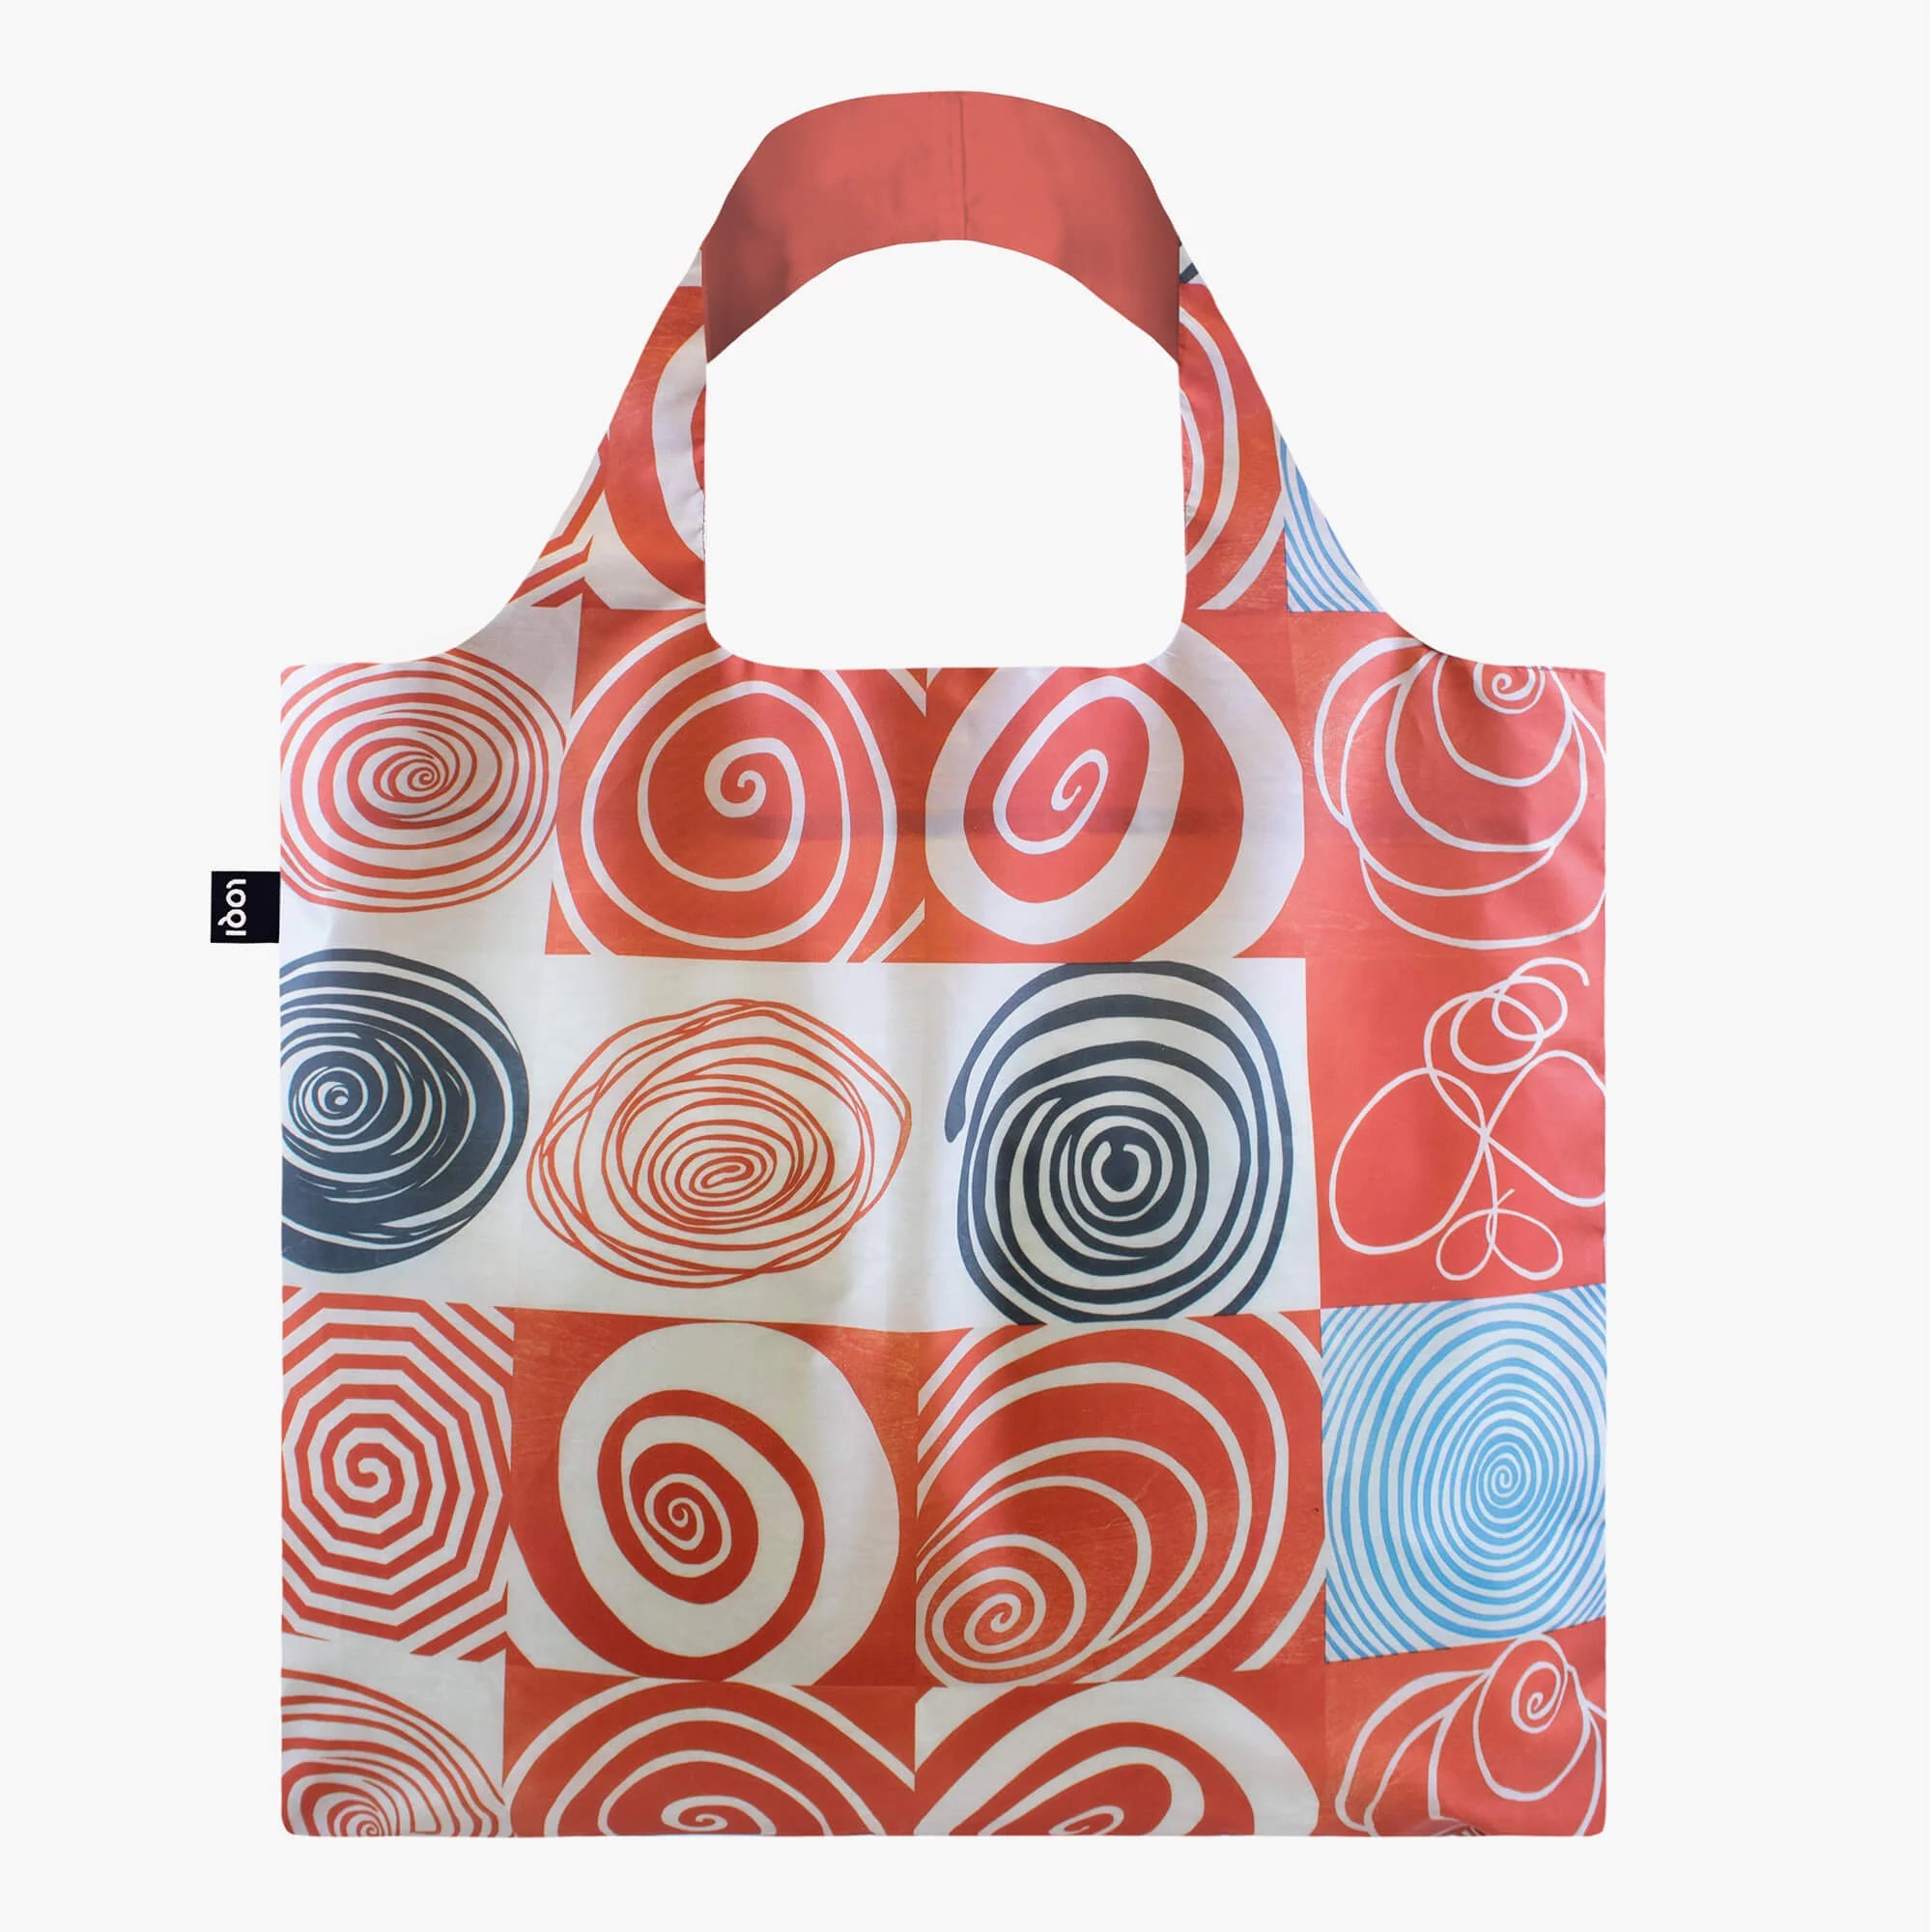 Louise Bourgeois Spiral Grids Bag